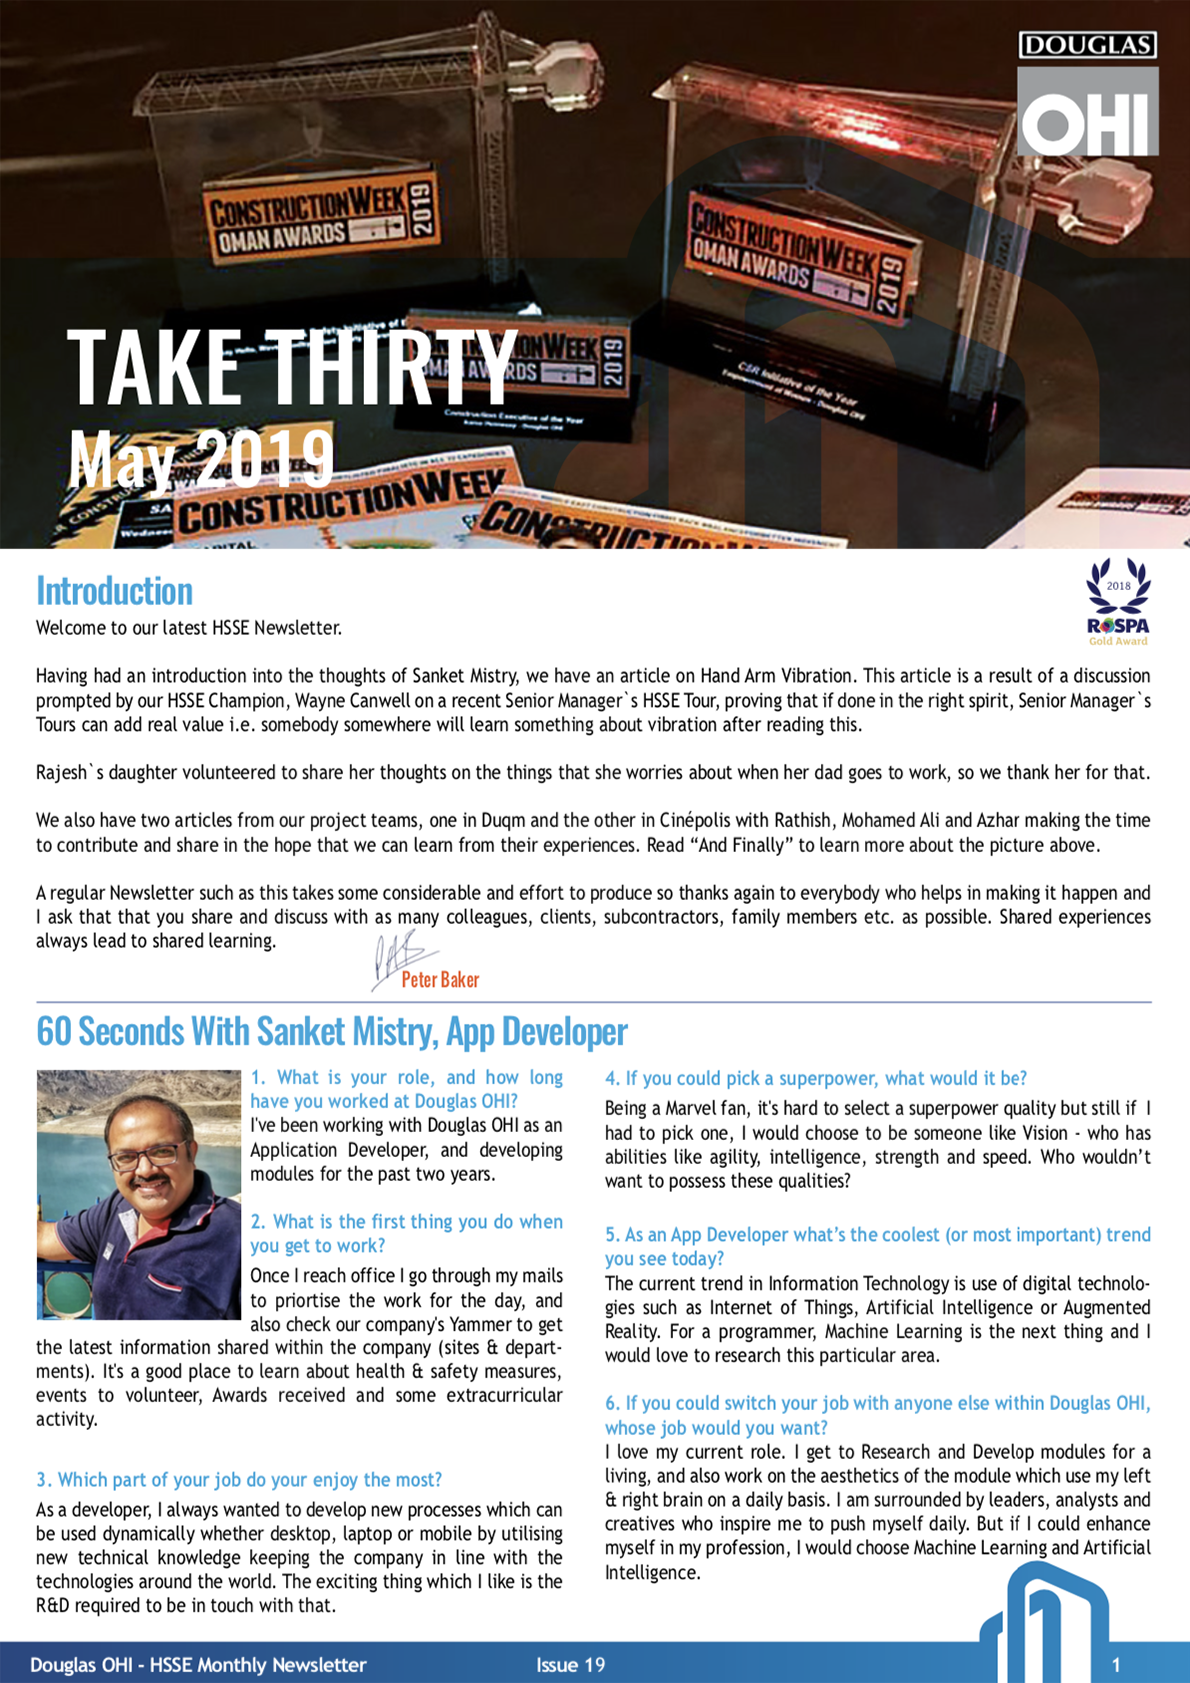 DOHI-HSE-Newsletter-May19-01